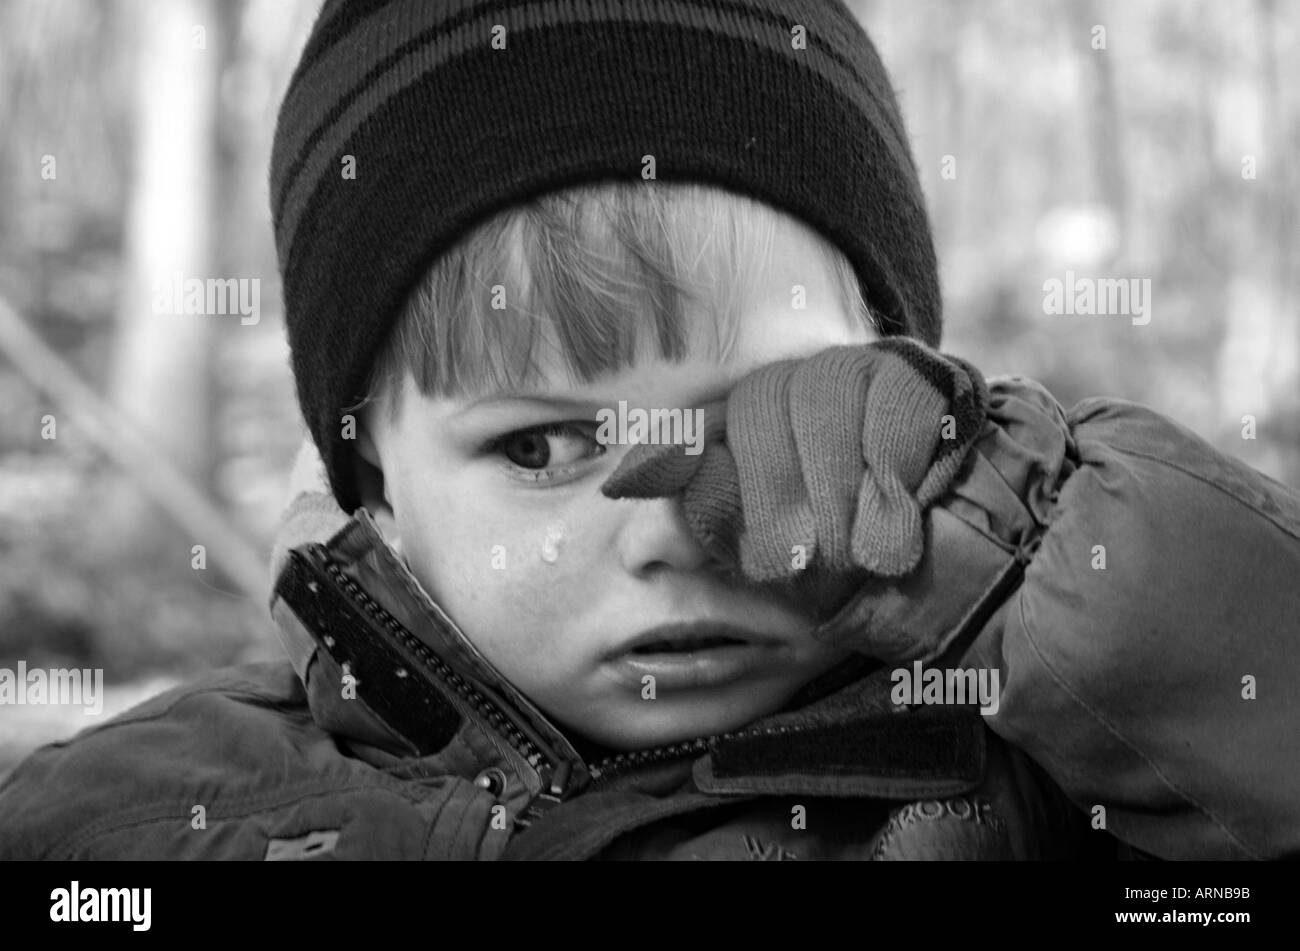 A child wipes tears from his face crying child Stock Photo